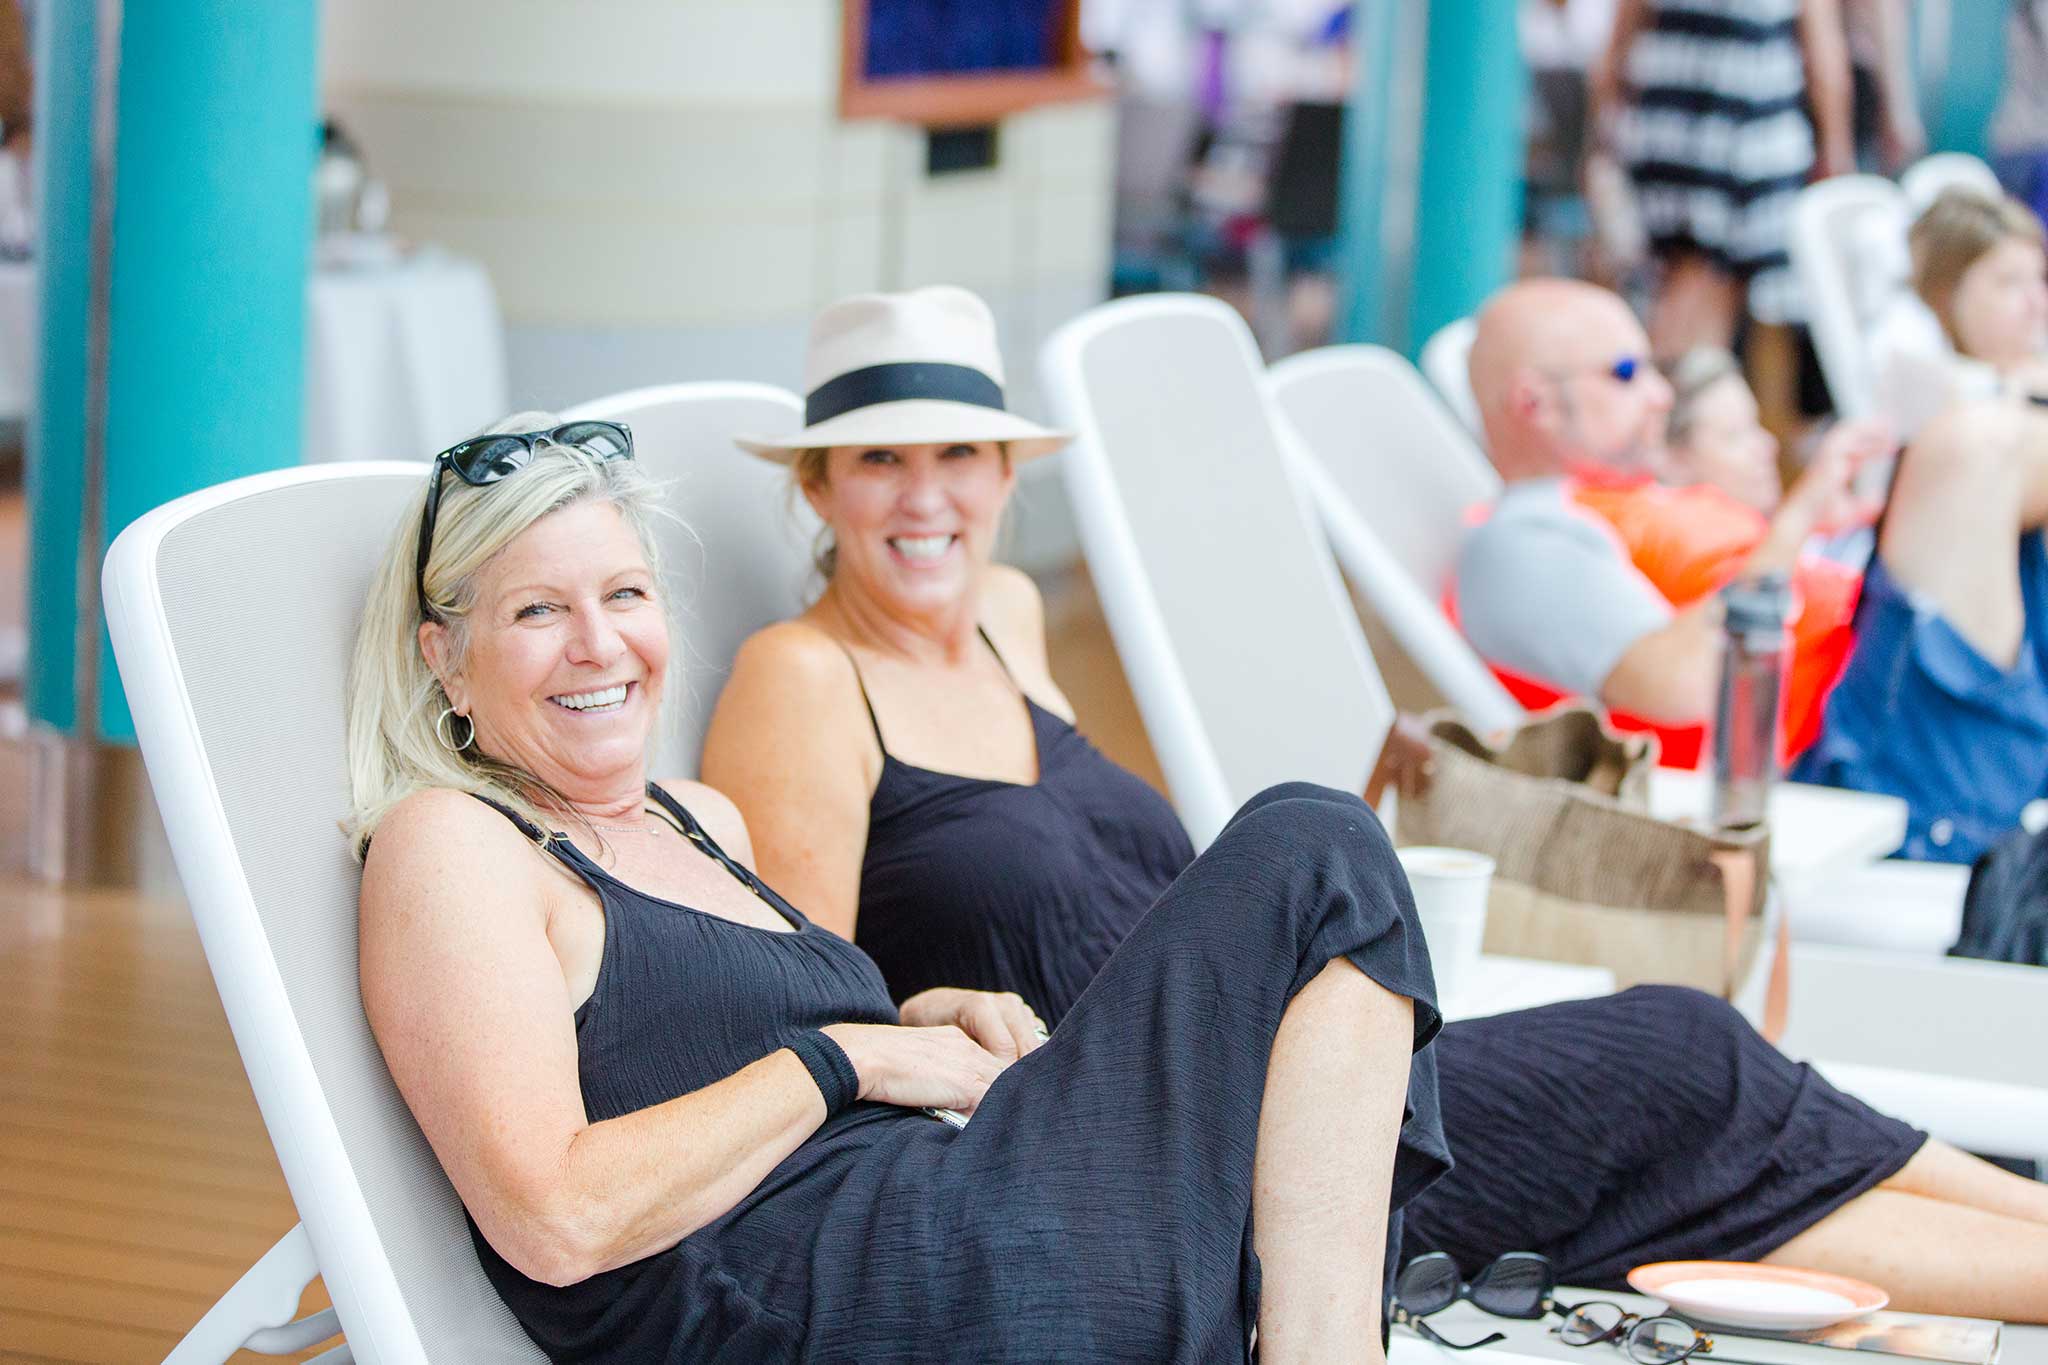 Two middle-aged ladies smile for the camera while wearing black swimsuit covers, hats and sunglasses while lounging on the cruise ship’s deck chairs.